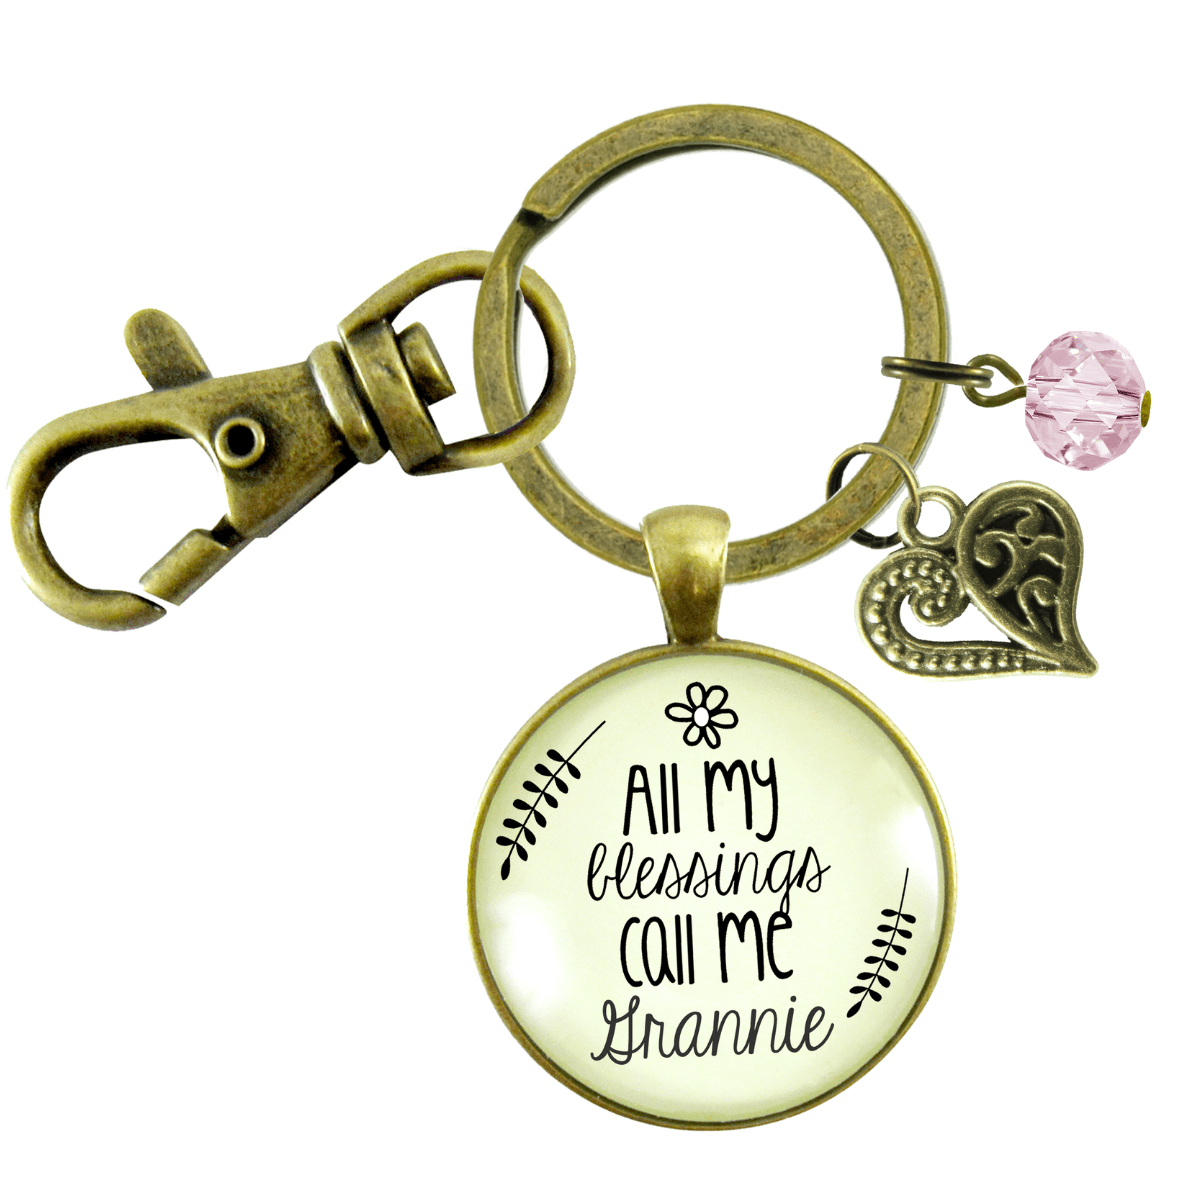 Grannie Keychain All My Blessings Meaningful Grandma Womens Family Gift Jewelry - Gutsy Goodness Handmade Jewelry;Grannie Keychain All My Blessings Meaningful Grandma Womens Family Gift Jewelry - Gutsy Goodness Handmade Jewelry Gifts